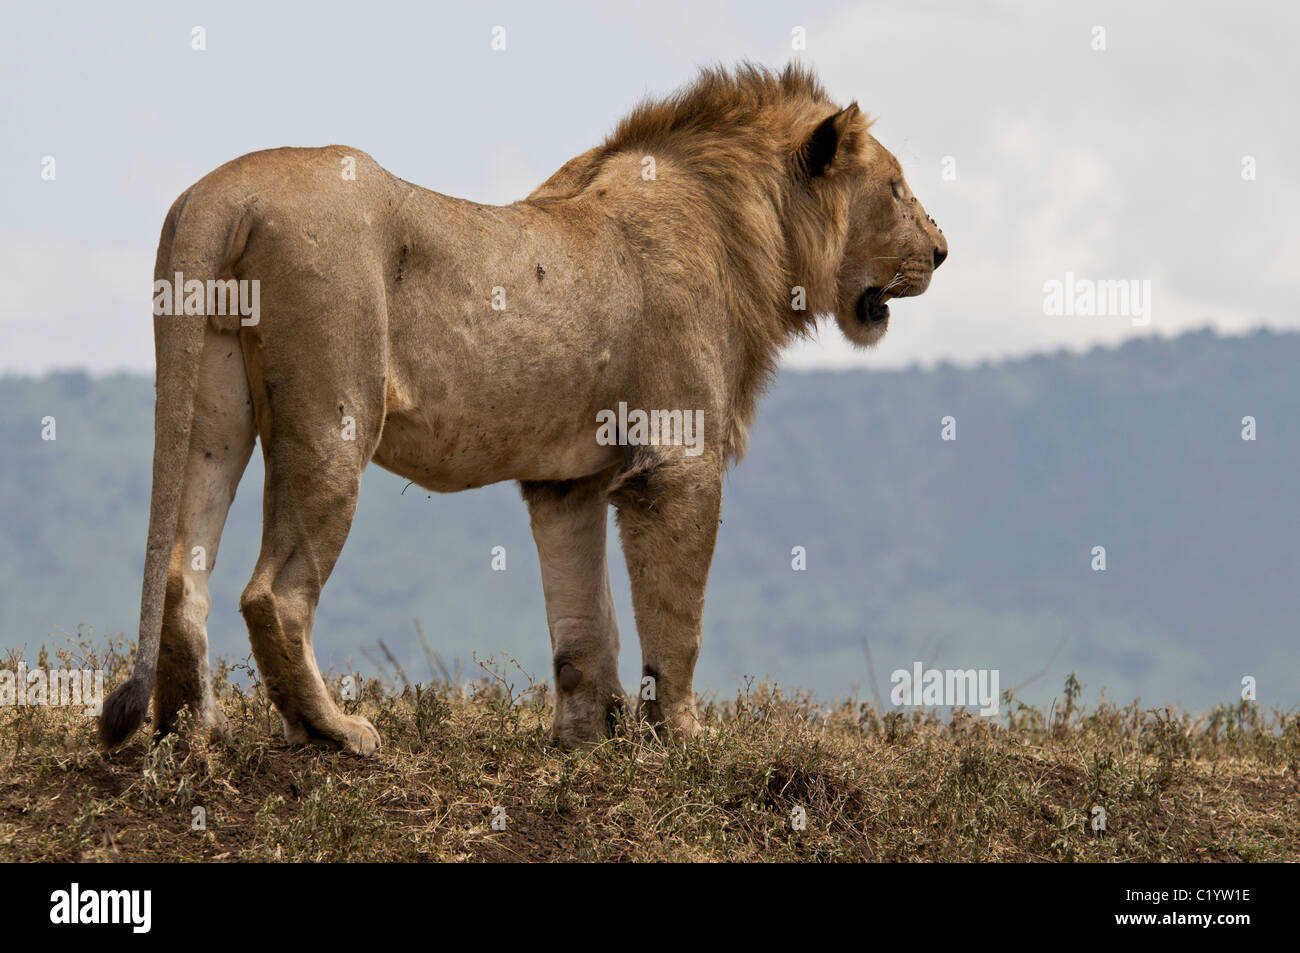 Stock photo of a young male lion standing on a ridge to survey the area. Stock Photo